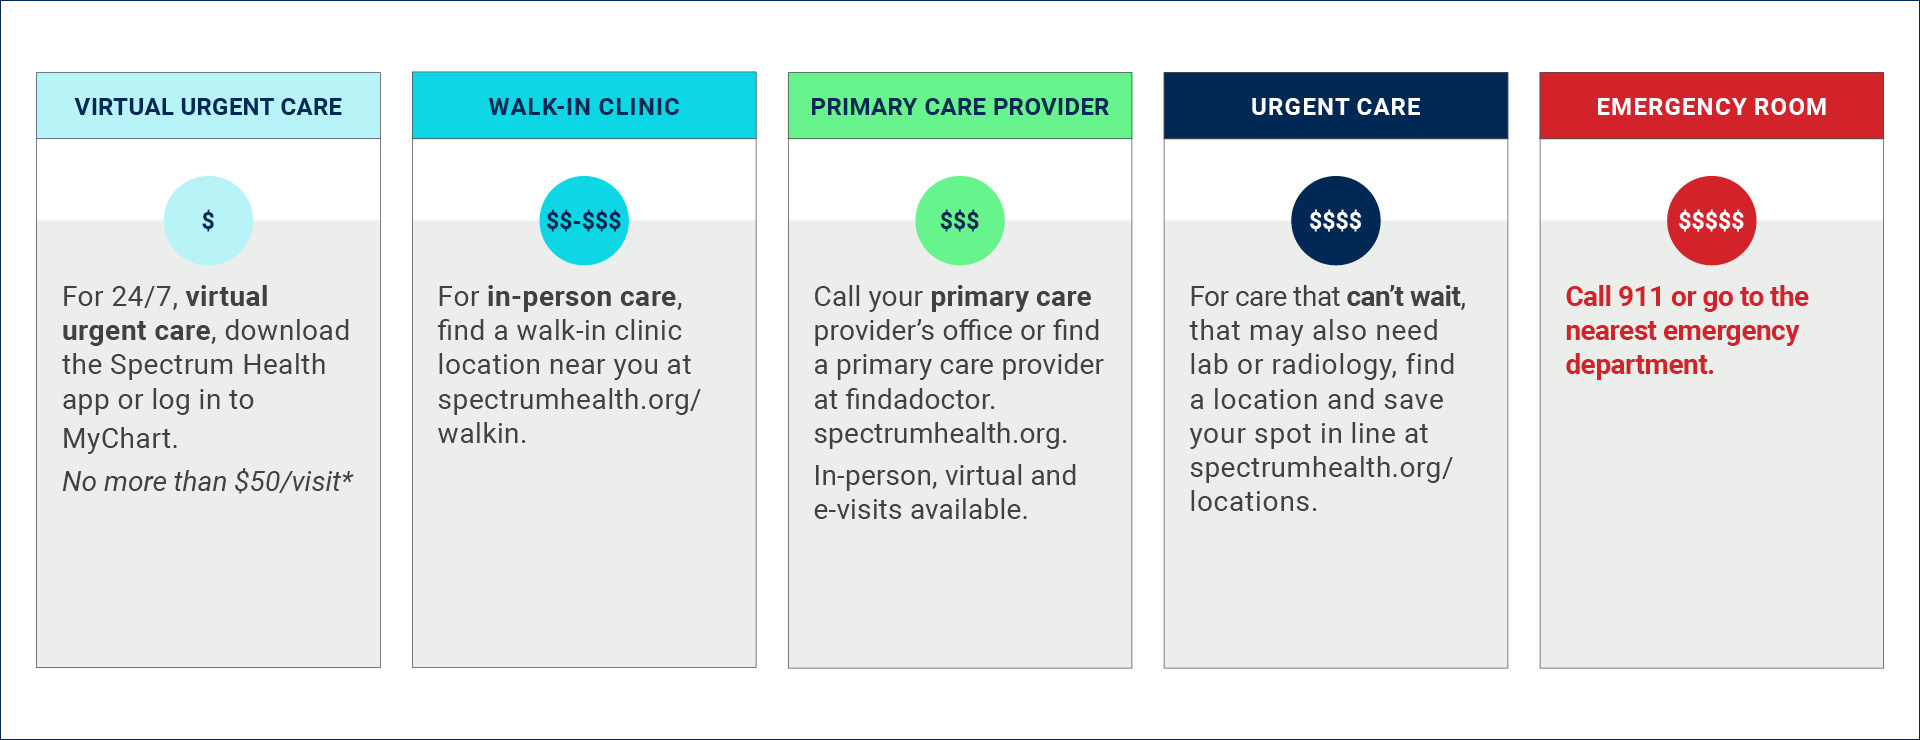 Chart with care options by severity and cost